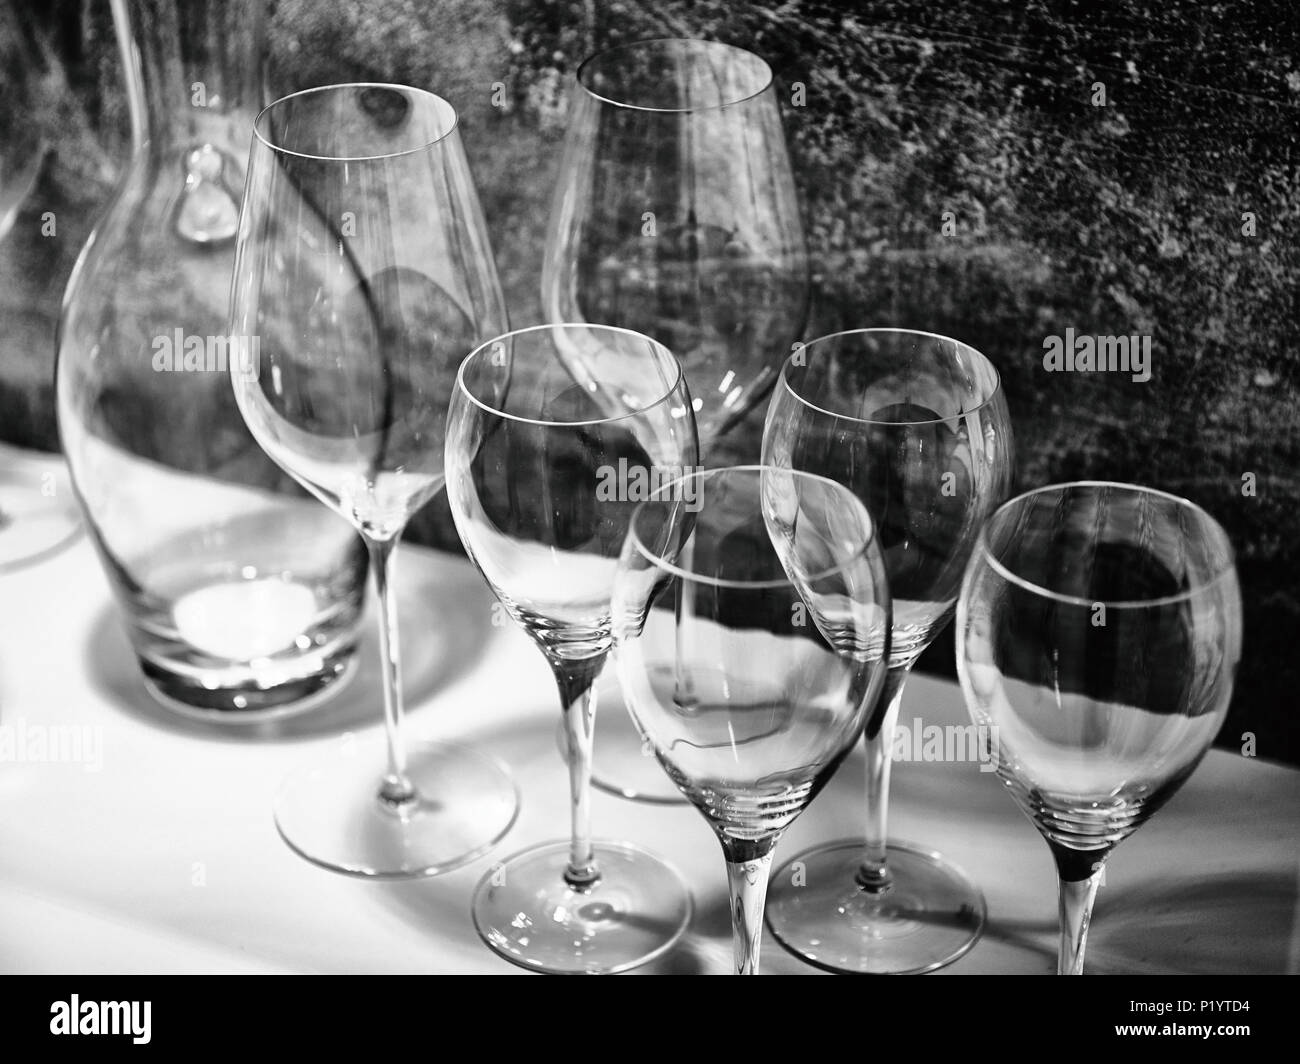 Black and white wine glasses for wine and drinks Stock Photo